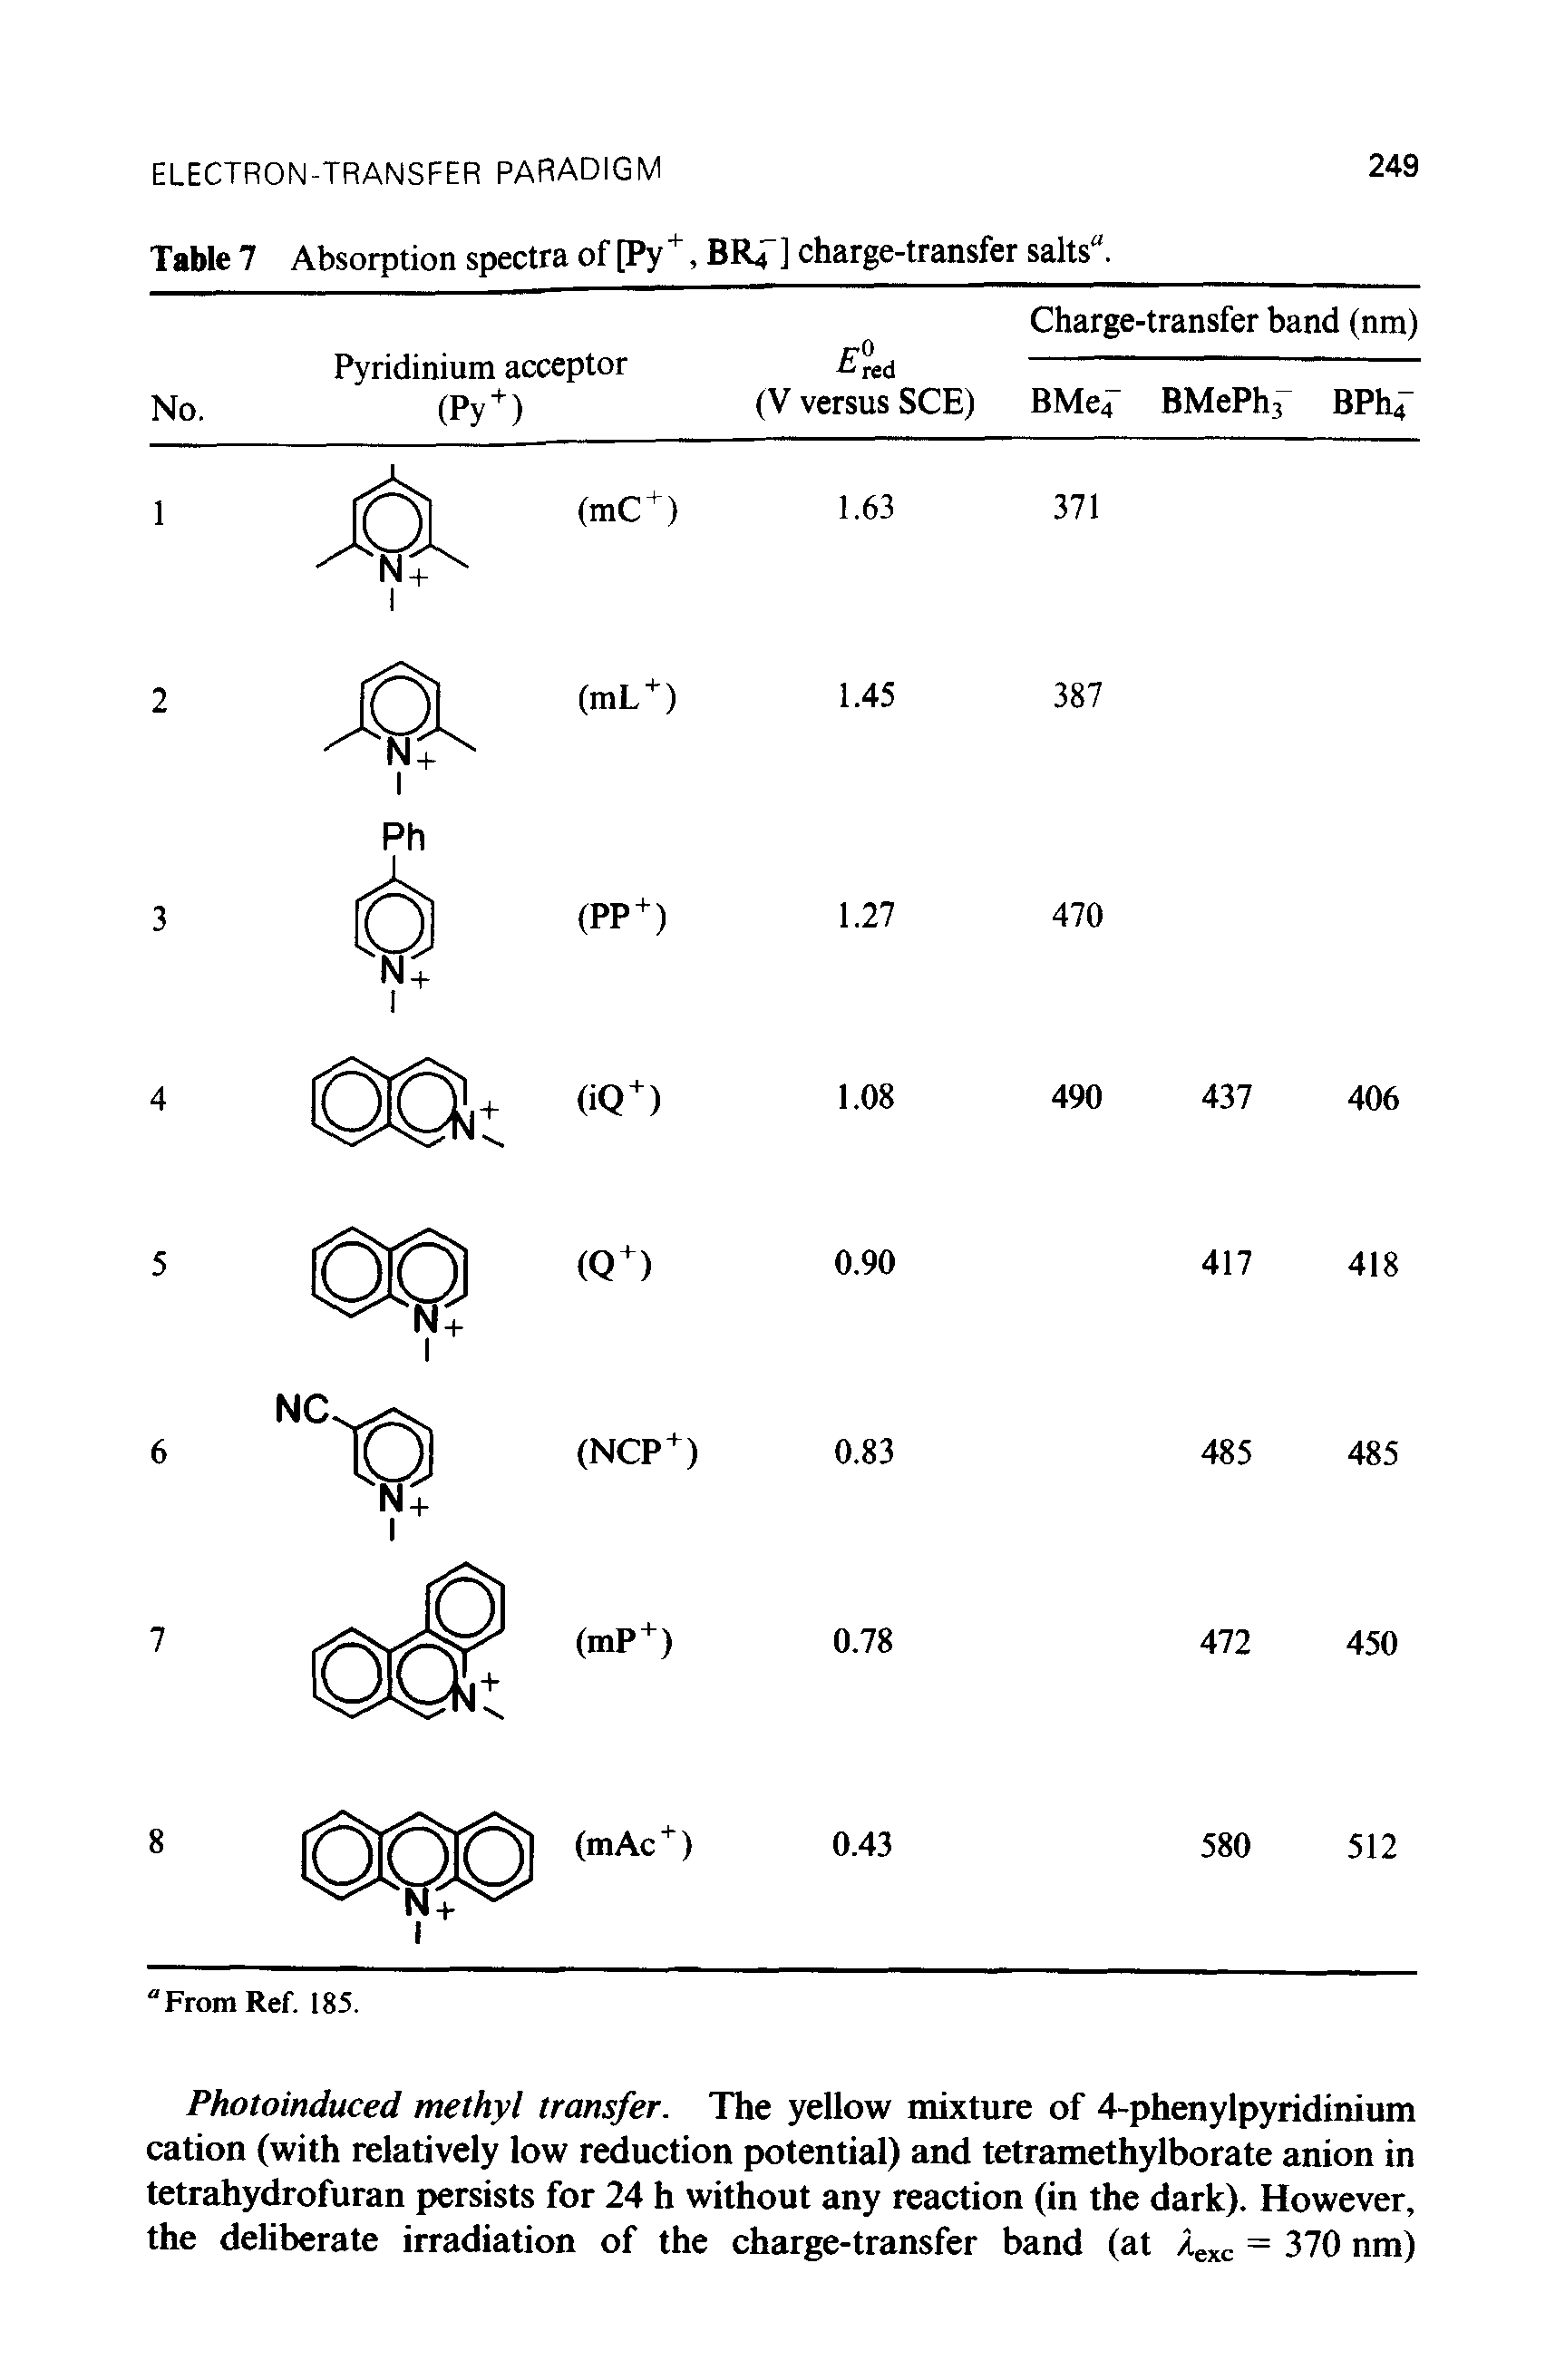 Table 7 Absorption spectra of [Py+, BR4 ] charge-transfer salts".